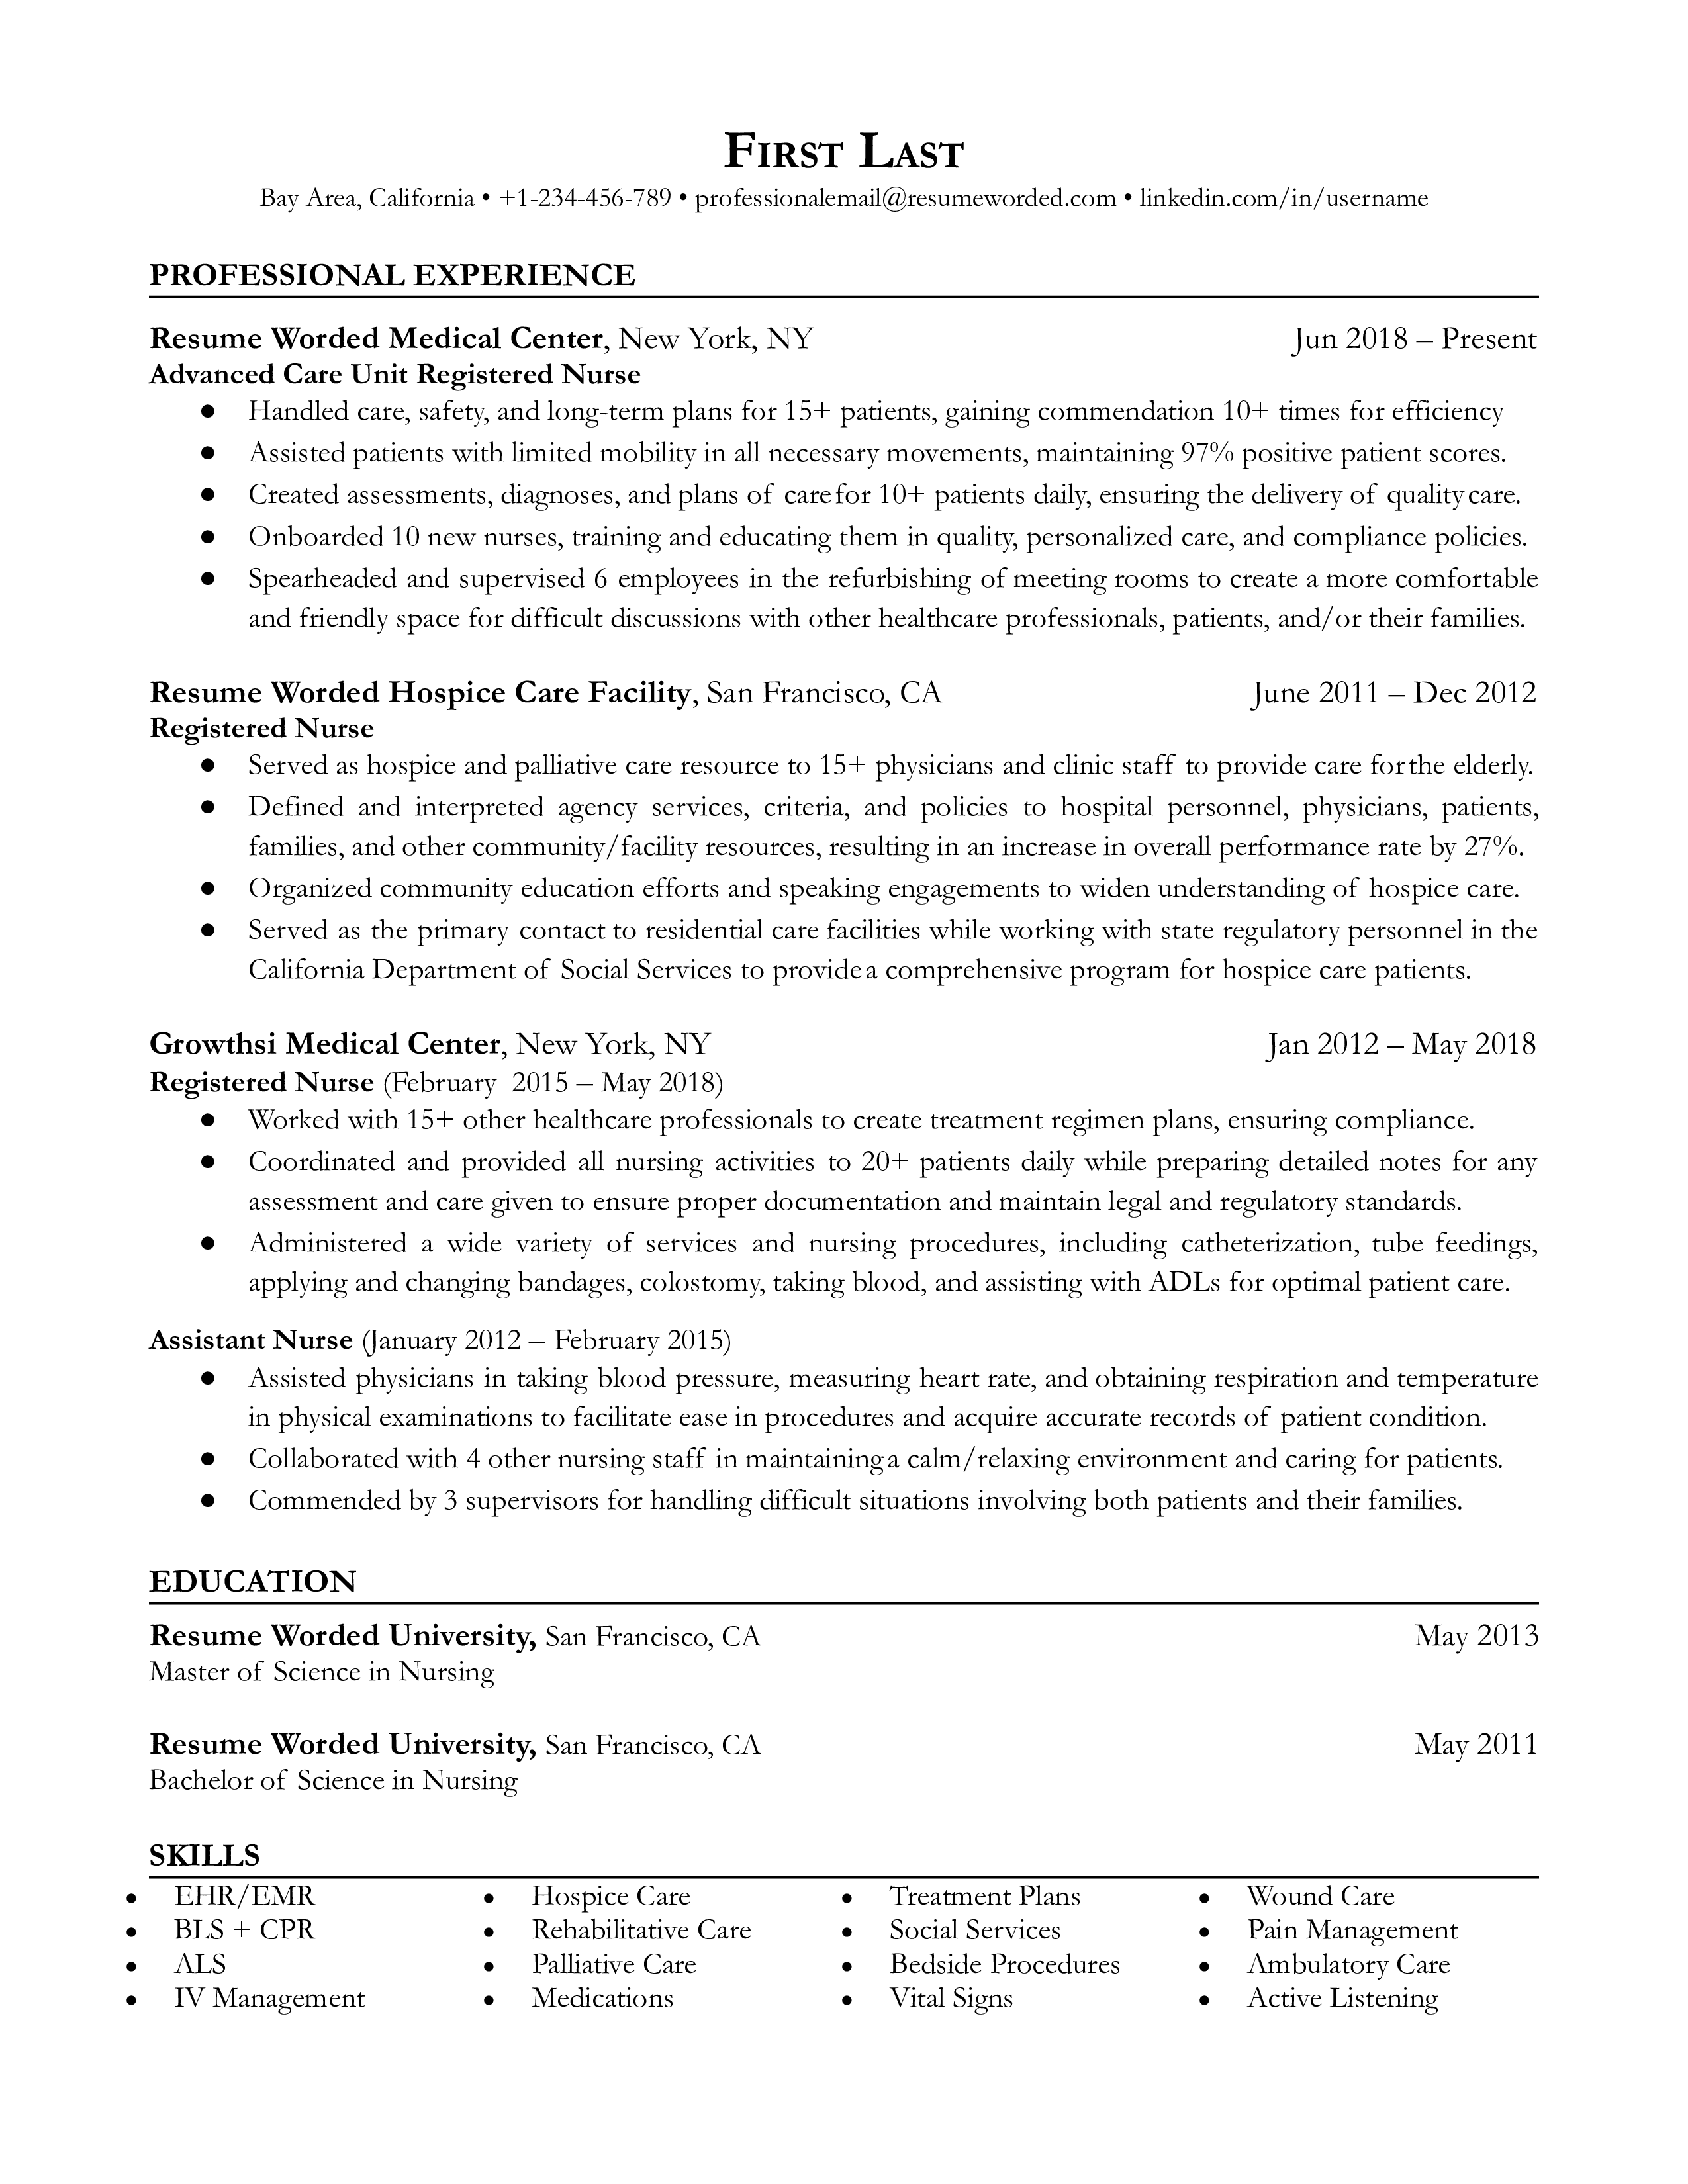 A well-structured CV of an experienced nurse showcasing specialties and leadership roles.